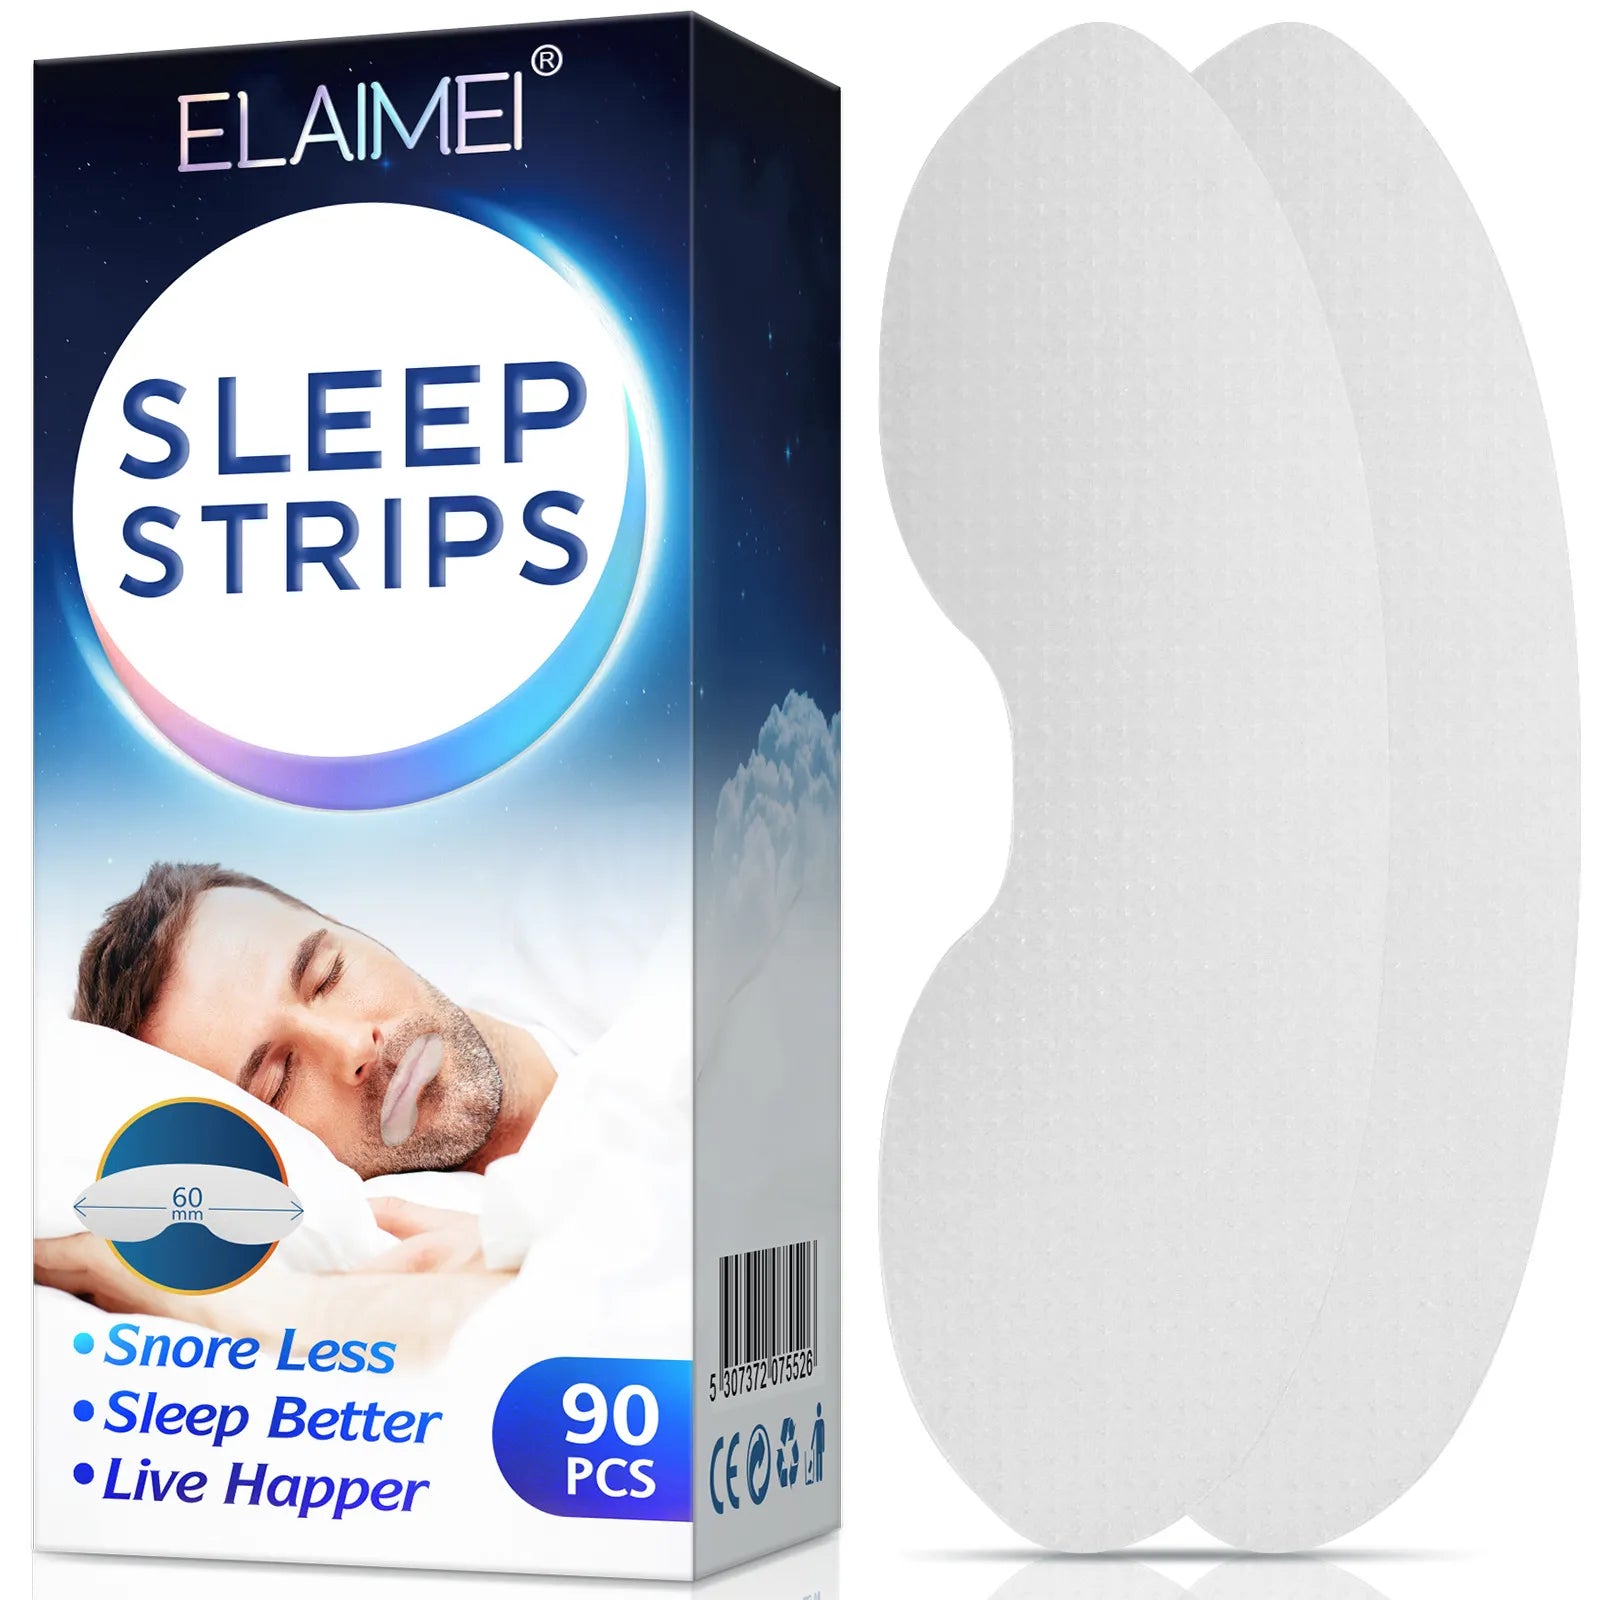 ELAIMEI Anti Snoring Sleep Strips Disposable Gentle Mouth Tape for Better Nose Breathing Reduce Mouth Dryness Sore Throat  beautylum.com   